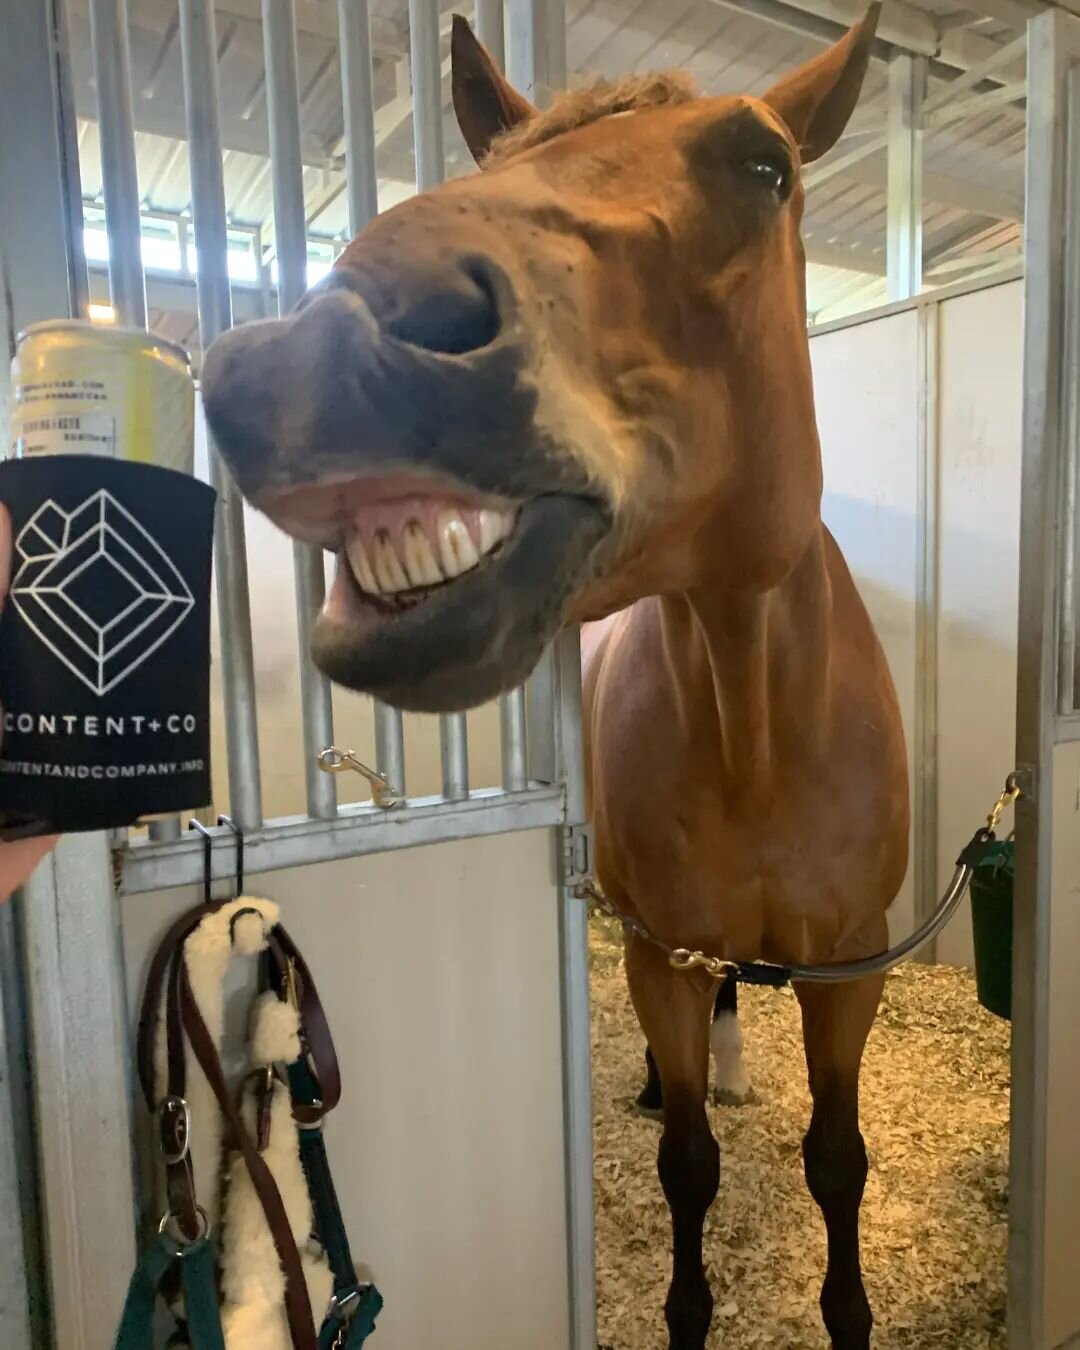 SAY CHEESE! 😁 Content + Co koozies are repping all over this summer. Thanks @lilmisselizabeth for this epic snap! 🐴 Share your Content + Co koozies photo with #contentkoozielove for a chance to be featured in our Stories. 📸